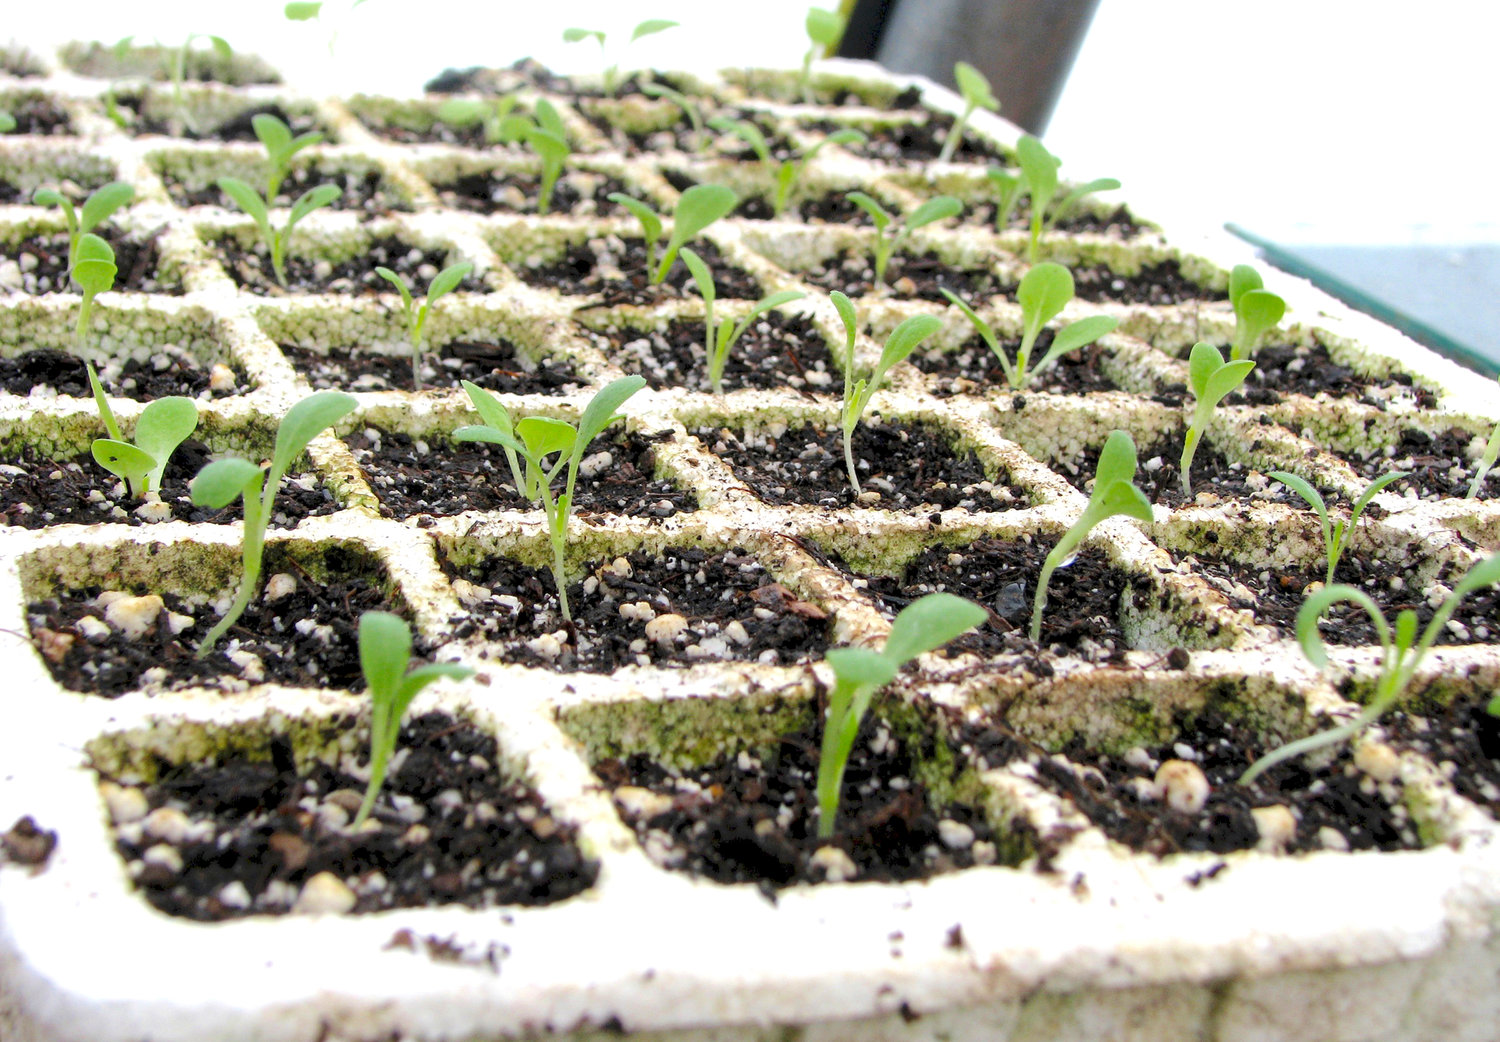 Lettuce seedlings — Salad greens are easy to start from seed; be sure to read the information on the seed packet for guidance such as spacing and thinning. You can also find plants for sale very early in the season.